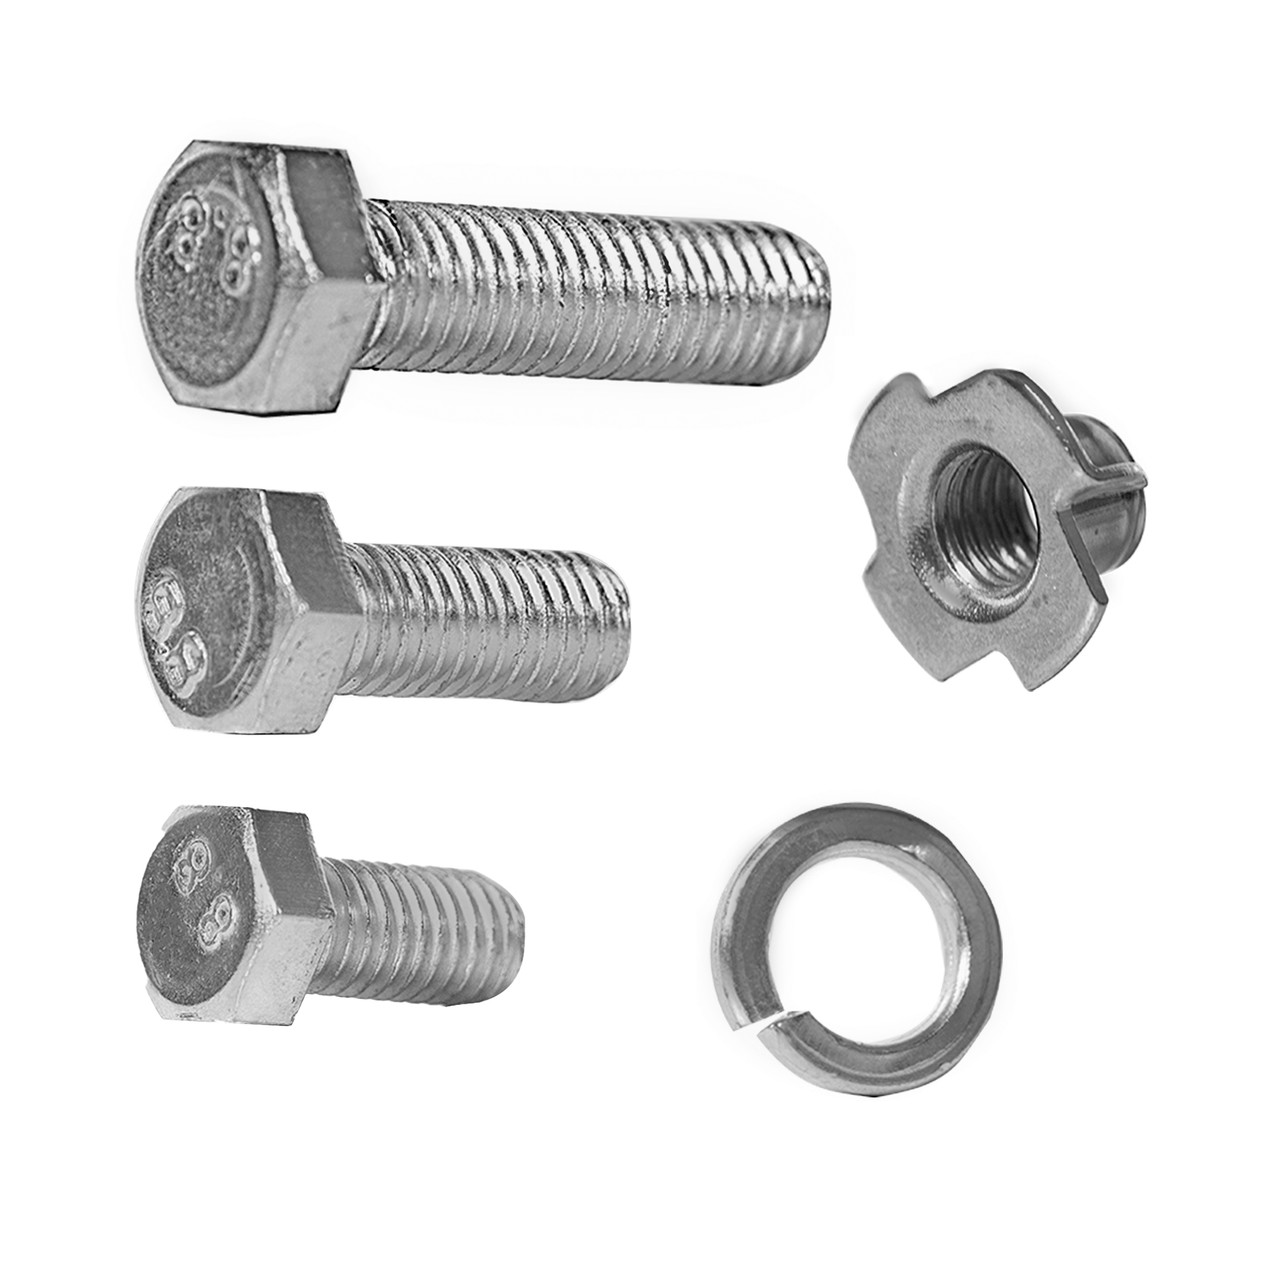 Caster Bolts, Nuts & Washers for OSP Flight Cases and Racks